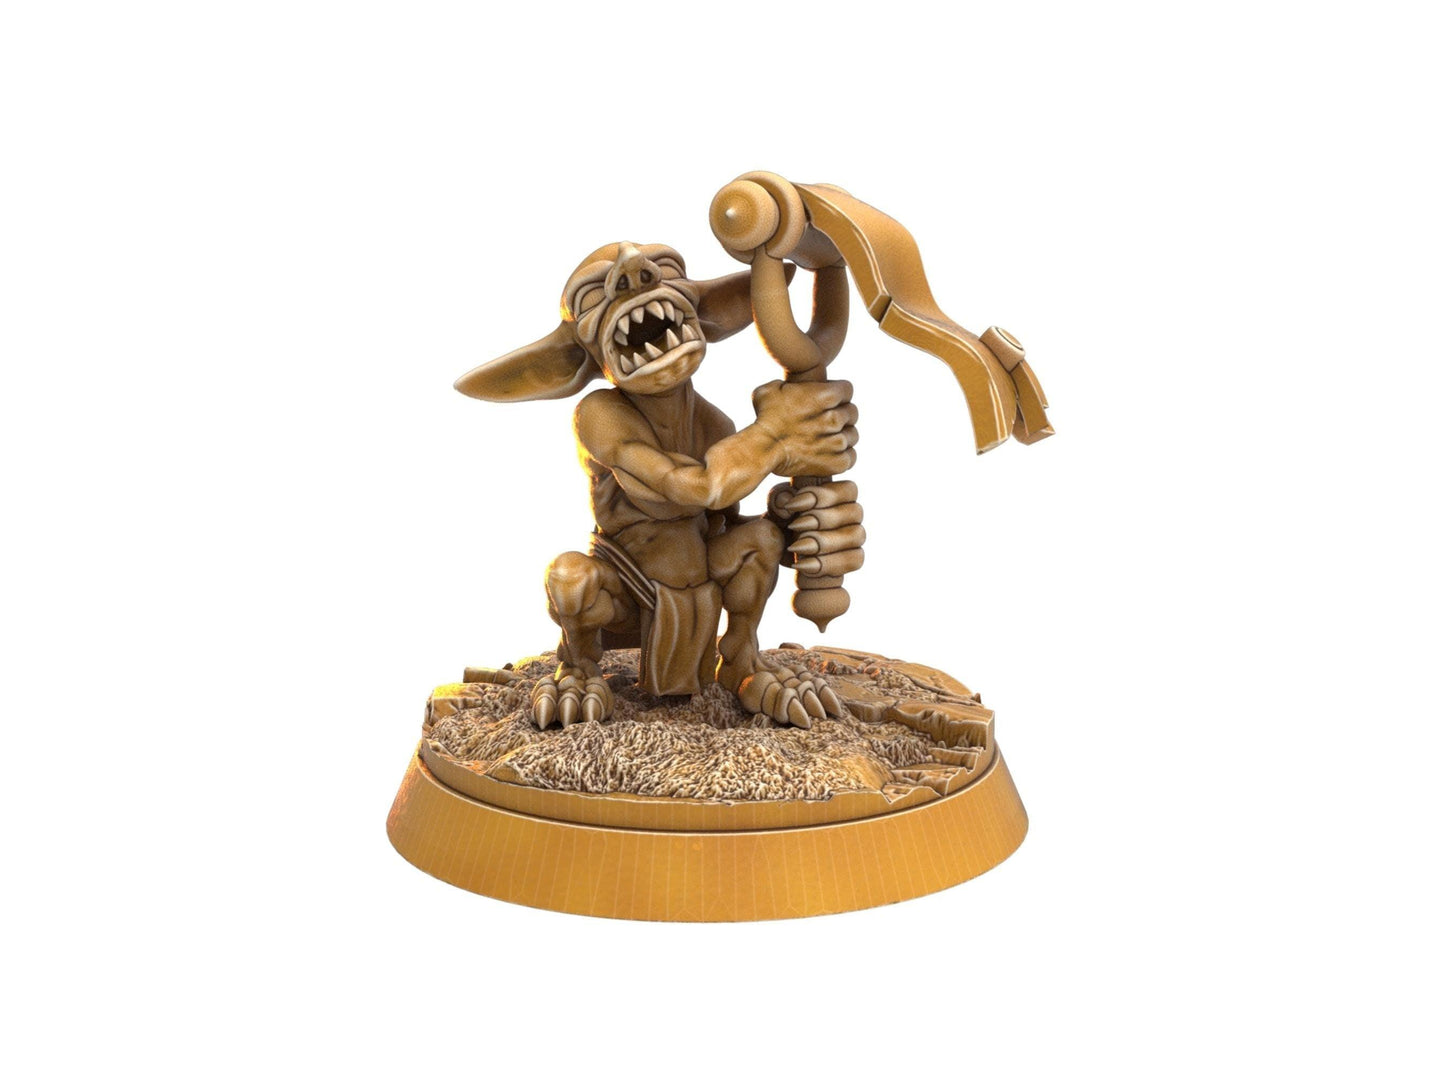 DnD Goblin Miniature Goblin Army Monster Miniature - 6 Poses - 32mm scale Tabletop gaming DnD Miniature Dungeons and Dragons dnd 5e book miniature small miniature - Plague Miniatures shop for DnD Miniatures